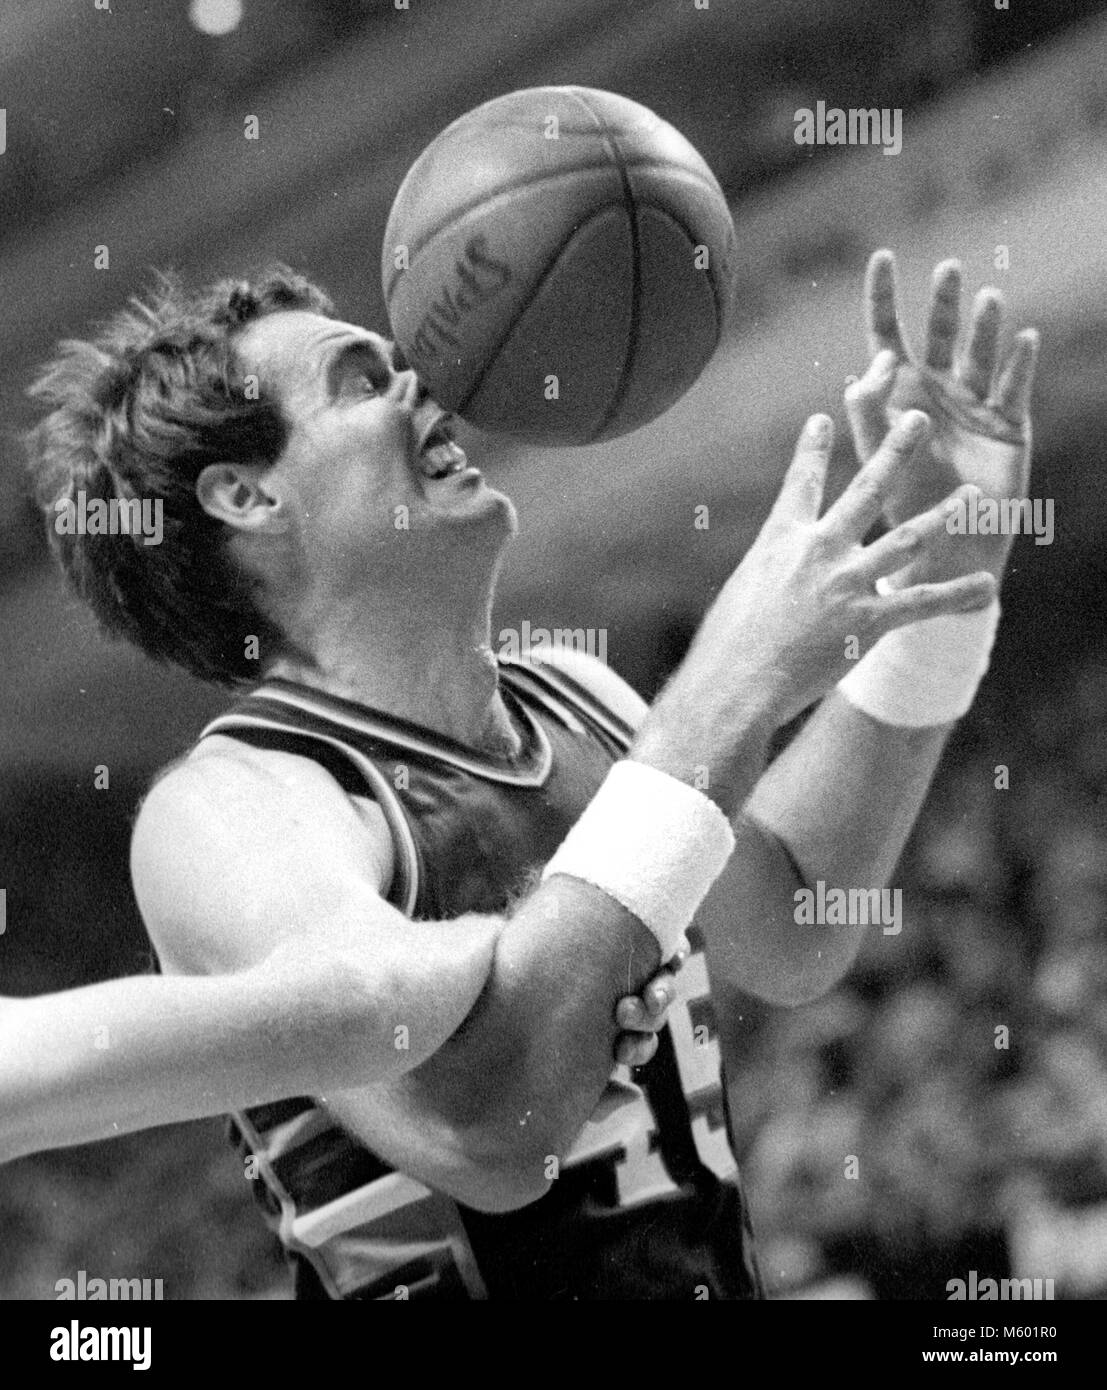 Milwaukee Bucks Randy Breuer has  ball slammed into his face while being fouled by Boston Celtics Danny Ainge in game action in the Boston Garden in Boston Mass USA photo by bill belknap photo won First Place Sports Action 1987 Boston Press Photographers  Assoc Stock Photo